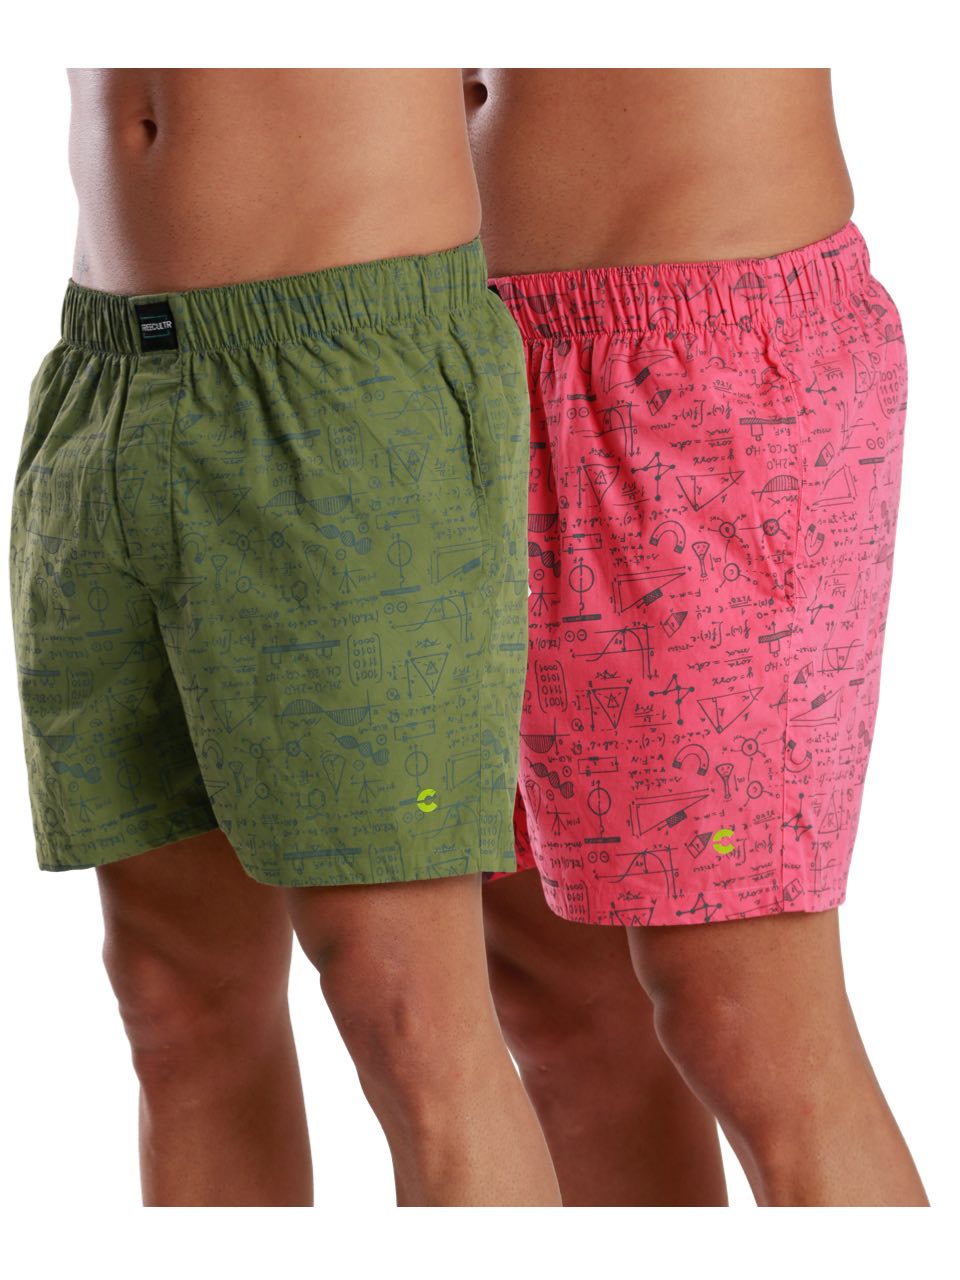 All-Day Absinthe Green & Pink Printed Boxer Shorts - (Pack of 2)